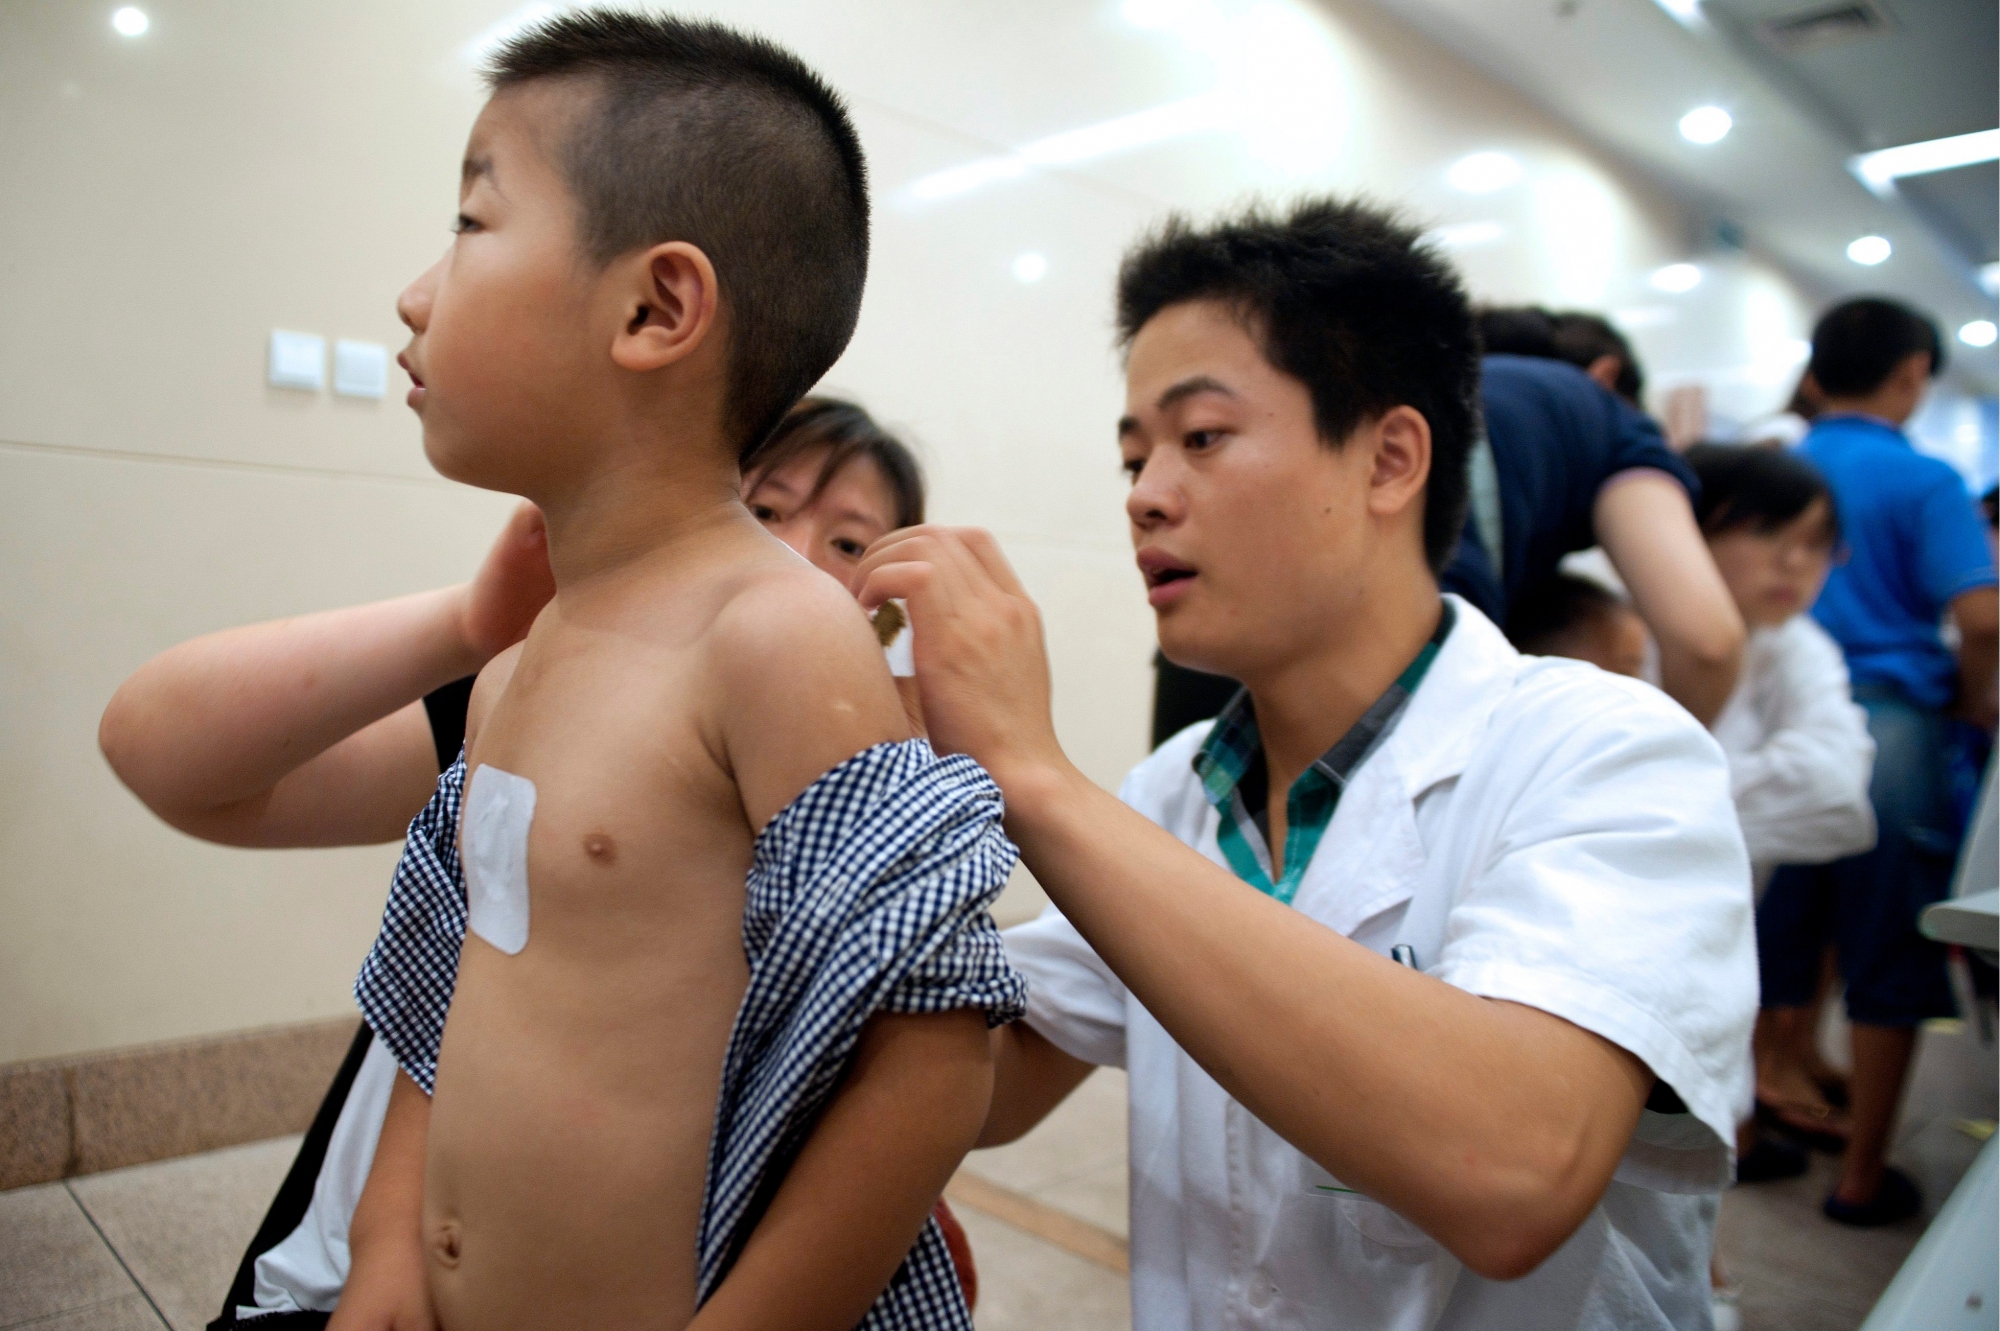 epa03309529 A doctor applies an ointment to a boy while receiving a traditional Chinese medical treatment named 'Winter Diseases Treated in Summer' at a hospital of Qingdao city, eastern China's Shandong province, 18 July 2012. This ancient tradition also called 'dong bing xia zhi' is a treatment that takes places during the summer or 30 hottest days of summer. The idea is build up the hot energy (yang) at this time of year when it is at its peak in the human body; this is believed to prevent or reduce winter ailments caused by the invasion of cold energy (yin) when yang is at a low level. The patients receive the treatments by point pasting with medical ointment on their body and moxibustion in order to cure tracheitis, asthma, rhinitis, rheumatoid arthritis and others winter diseases.  EPA/WU HONG CHINA ALTERNATIVMEDIZIN